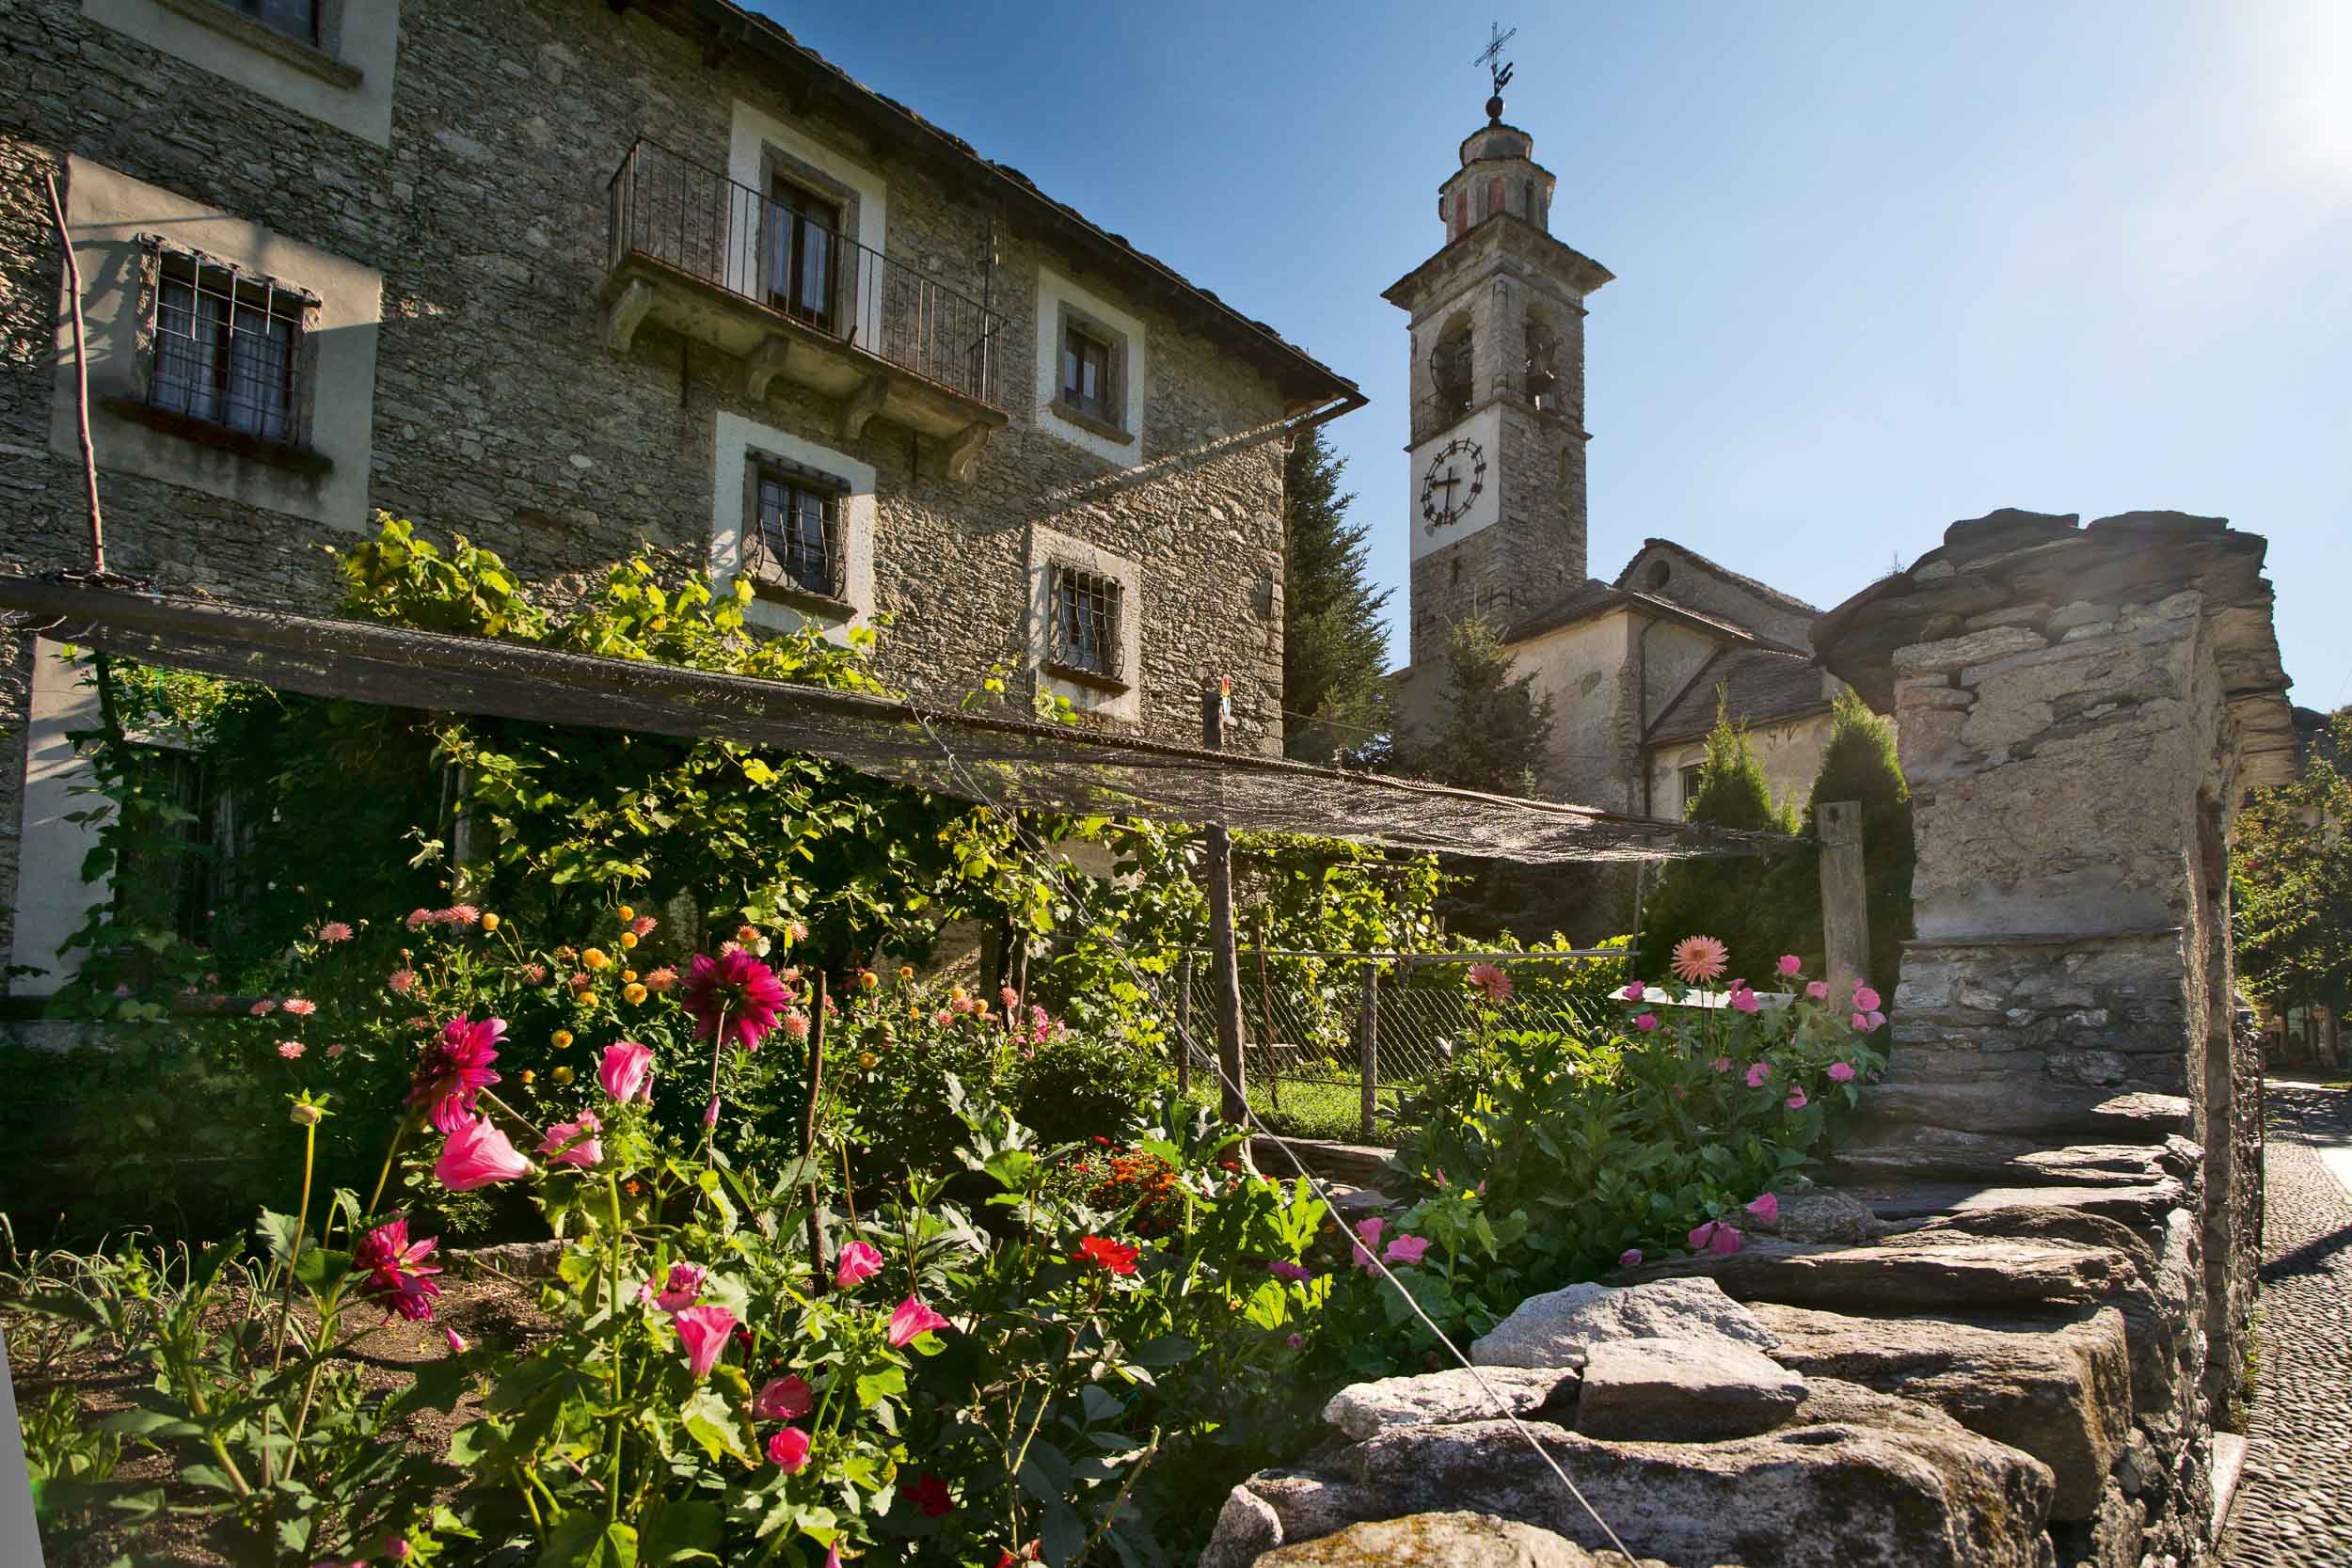 The church tower of St. Anne in Rasa in the Centovalli. Rasa is one of the smallest municipalities in Ticino. Only about 20 people live here year round. Copyright by: Switzerland Tourism